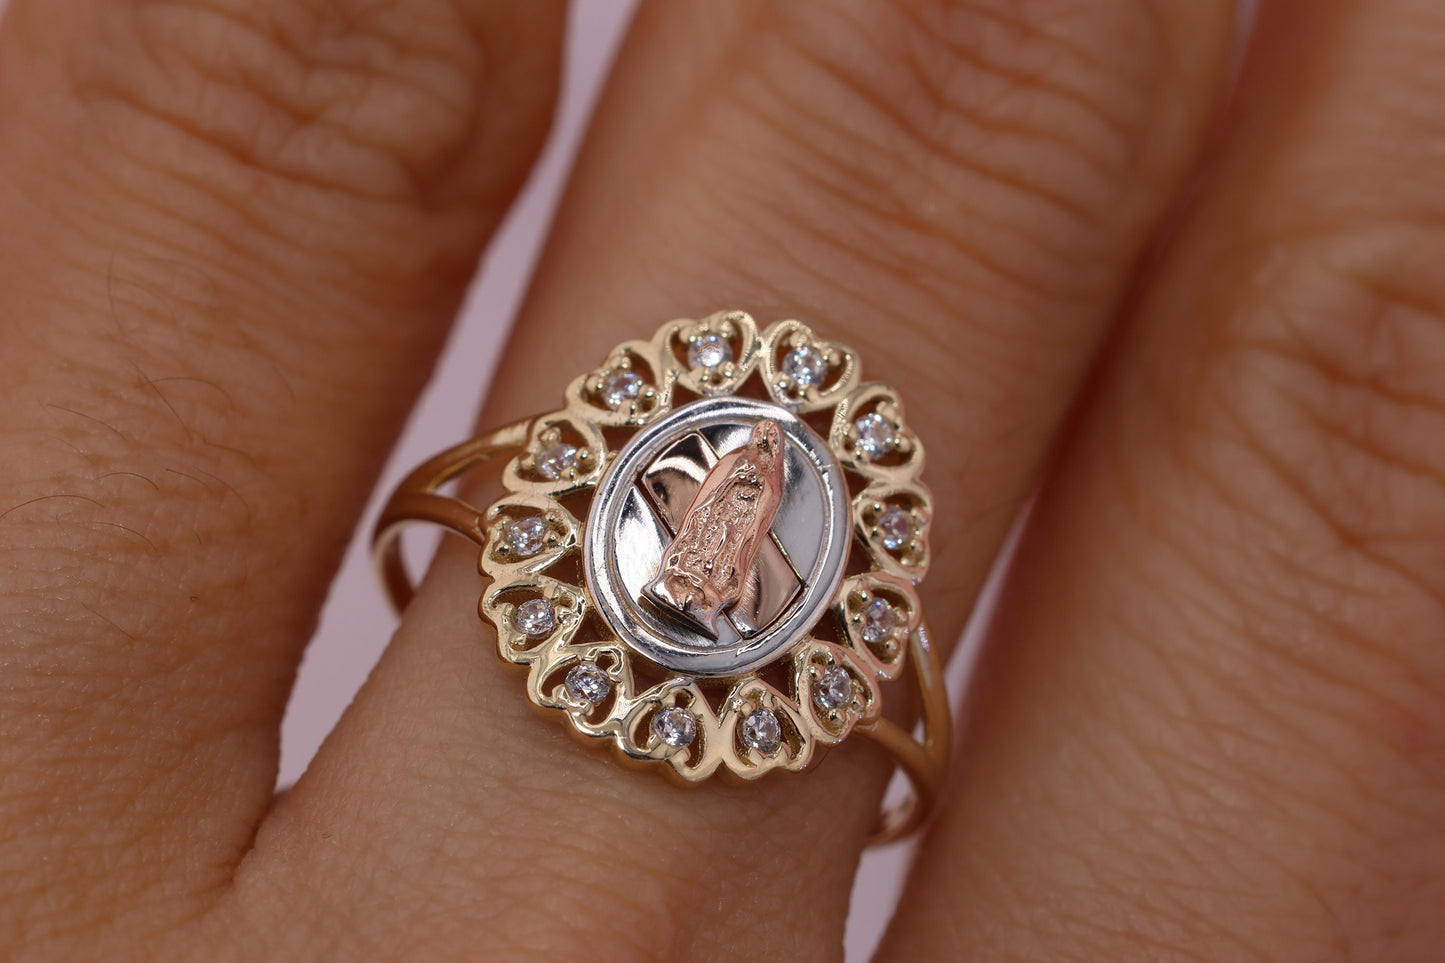 14k Solid Gold Virgin Mary Virgen Maria Lady Guadalupe Ring GG